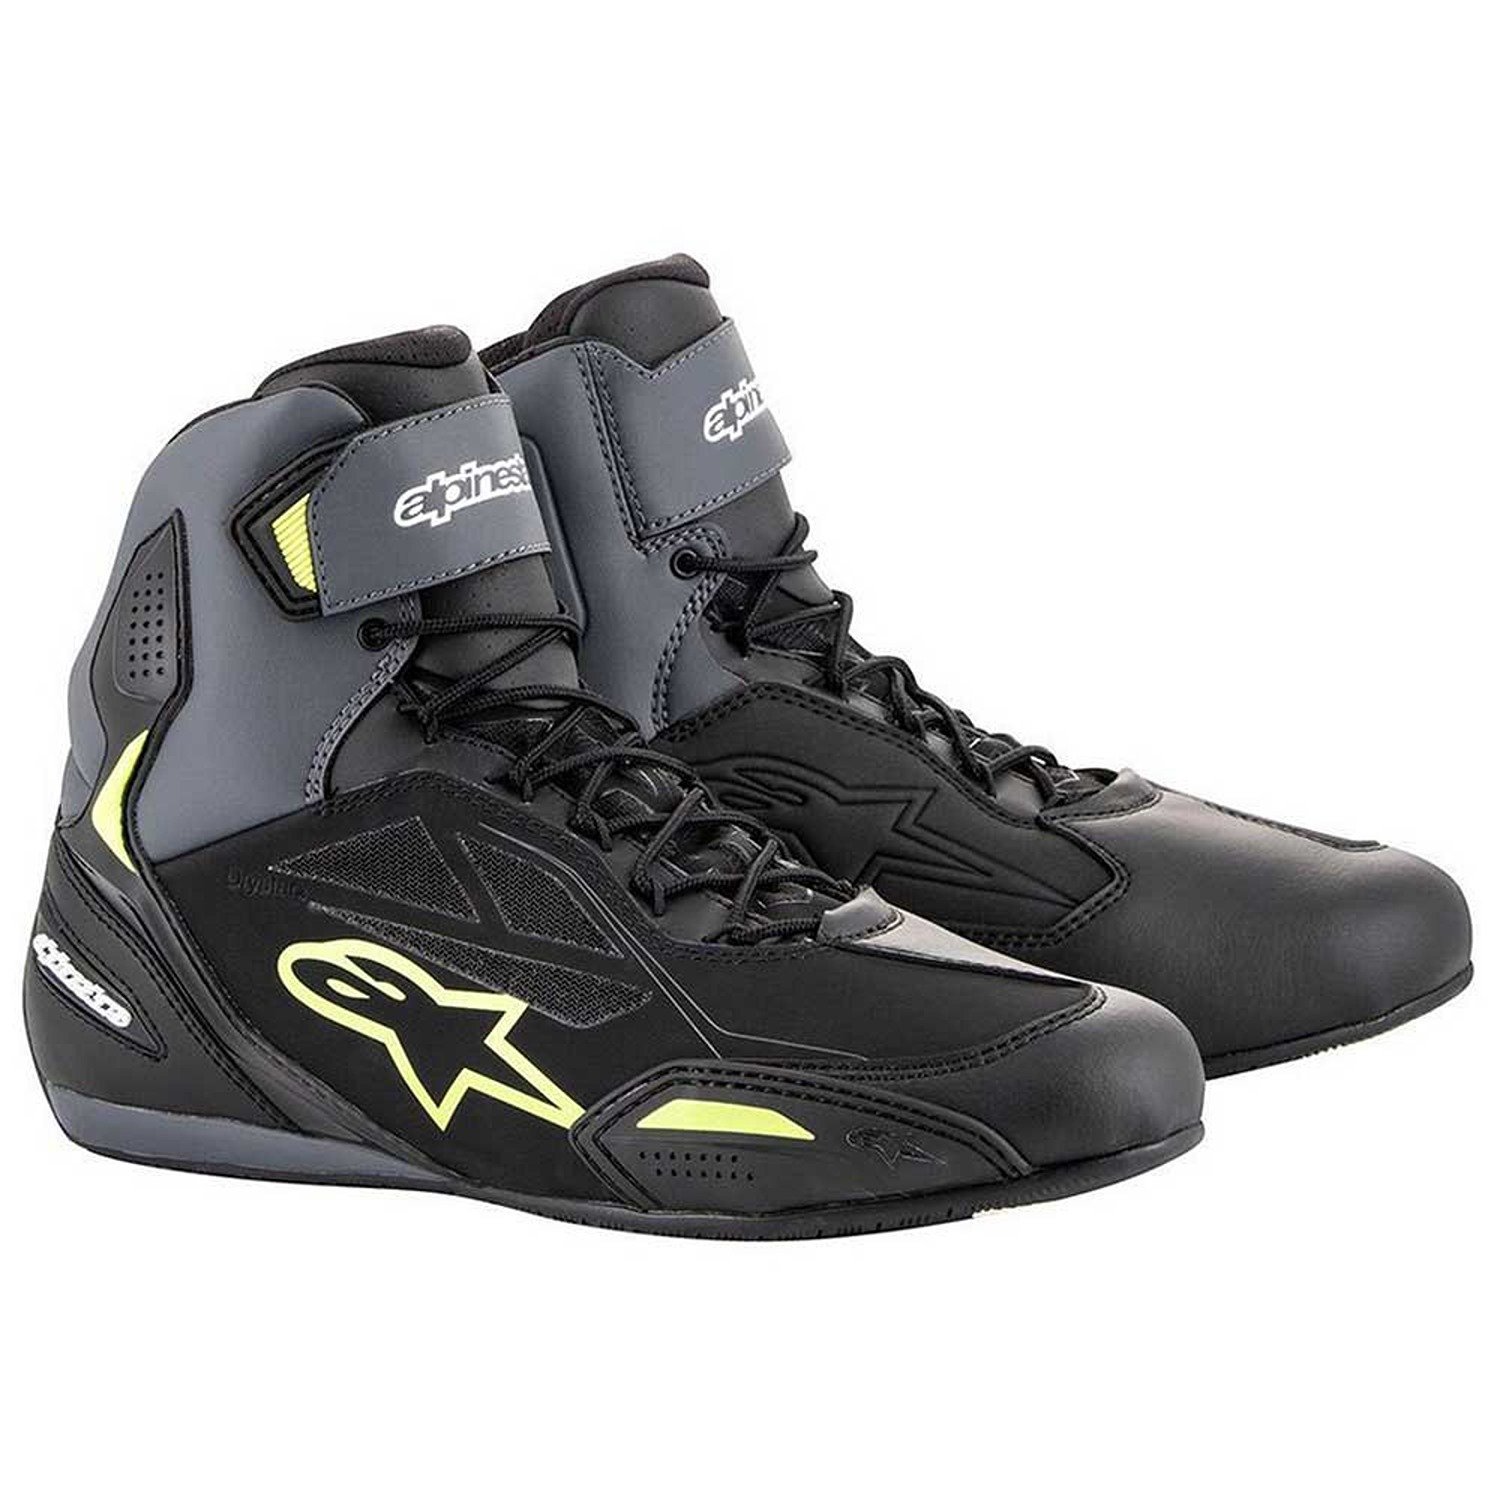 Image of Alpinestars Faster-3 Shoes Black Yellow Fluo Talla US 125